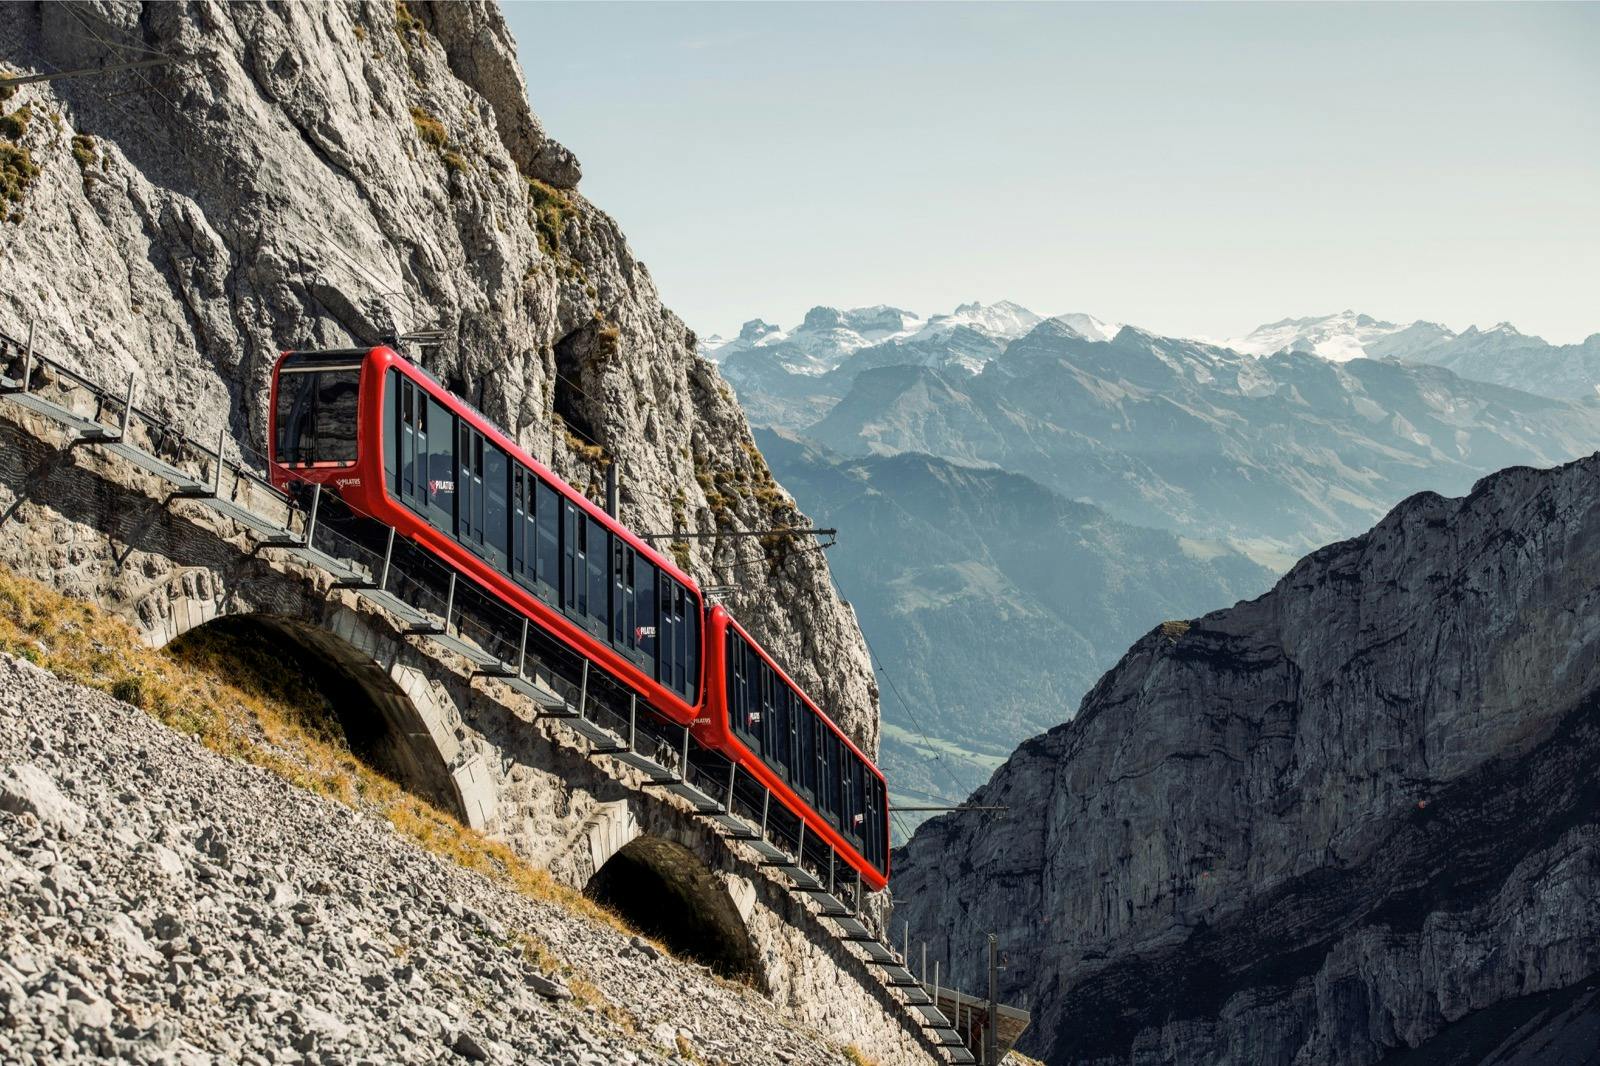 Mount Pilatus: Self-Guided Silver Roundtrip from Lucerne + Train